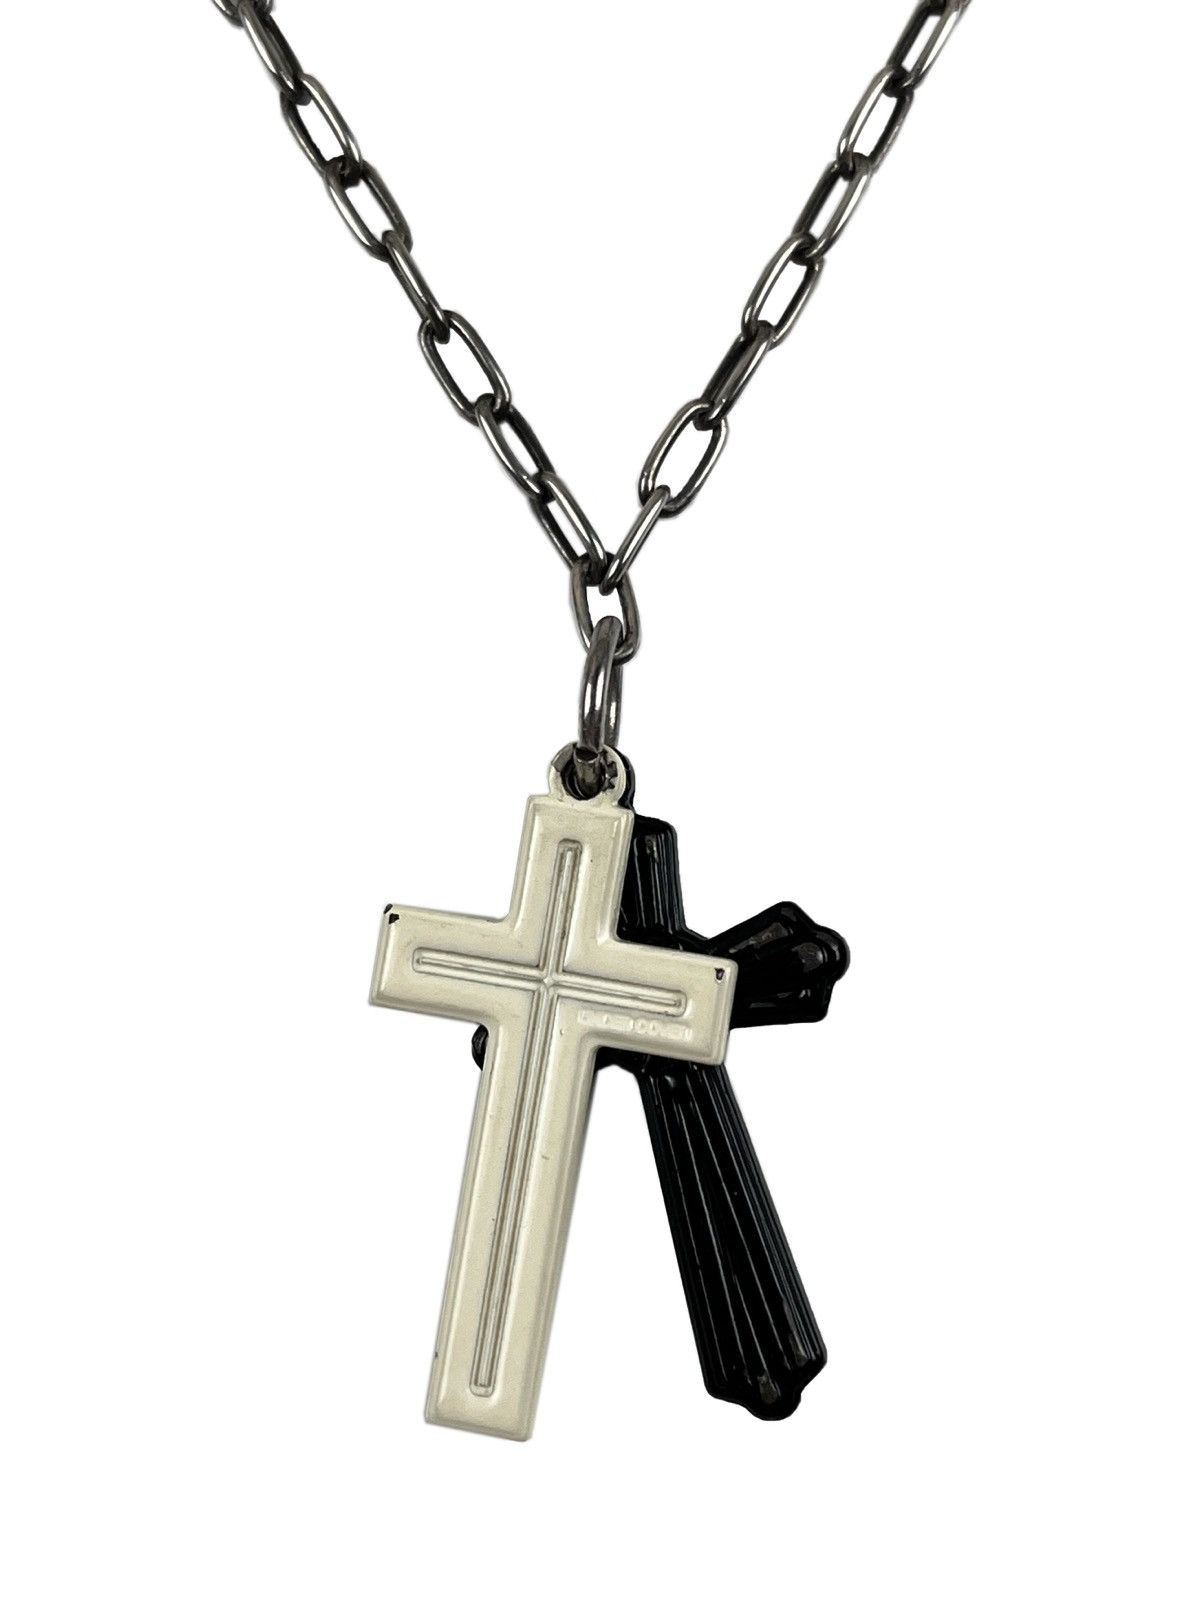 Pre-owned Jun Takahashi X Undercover Aw02 Undercover Witches Cell Division Silver Cross Necklace